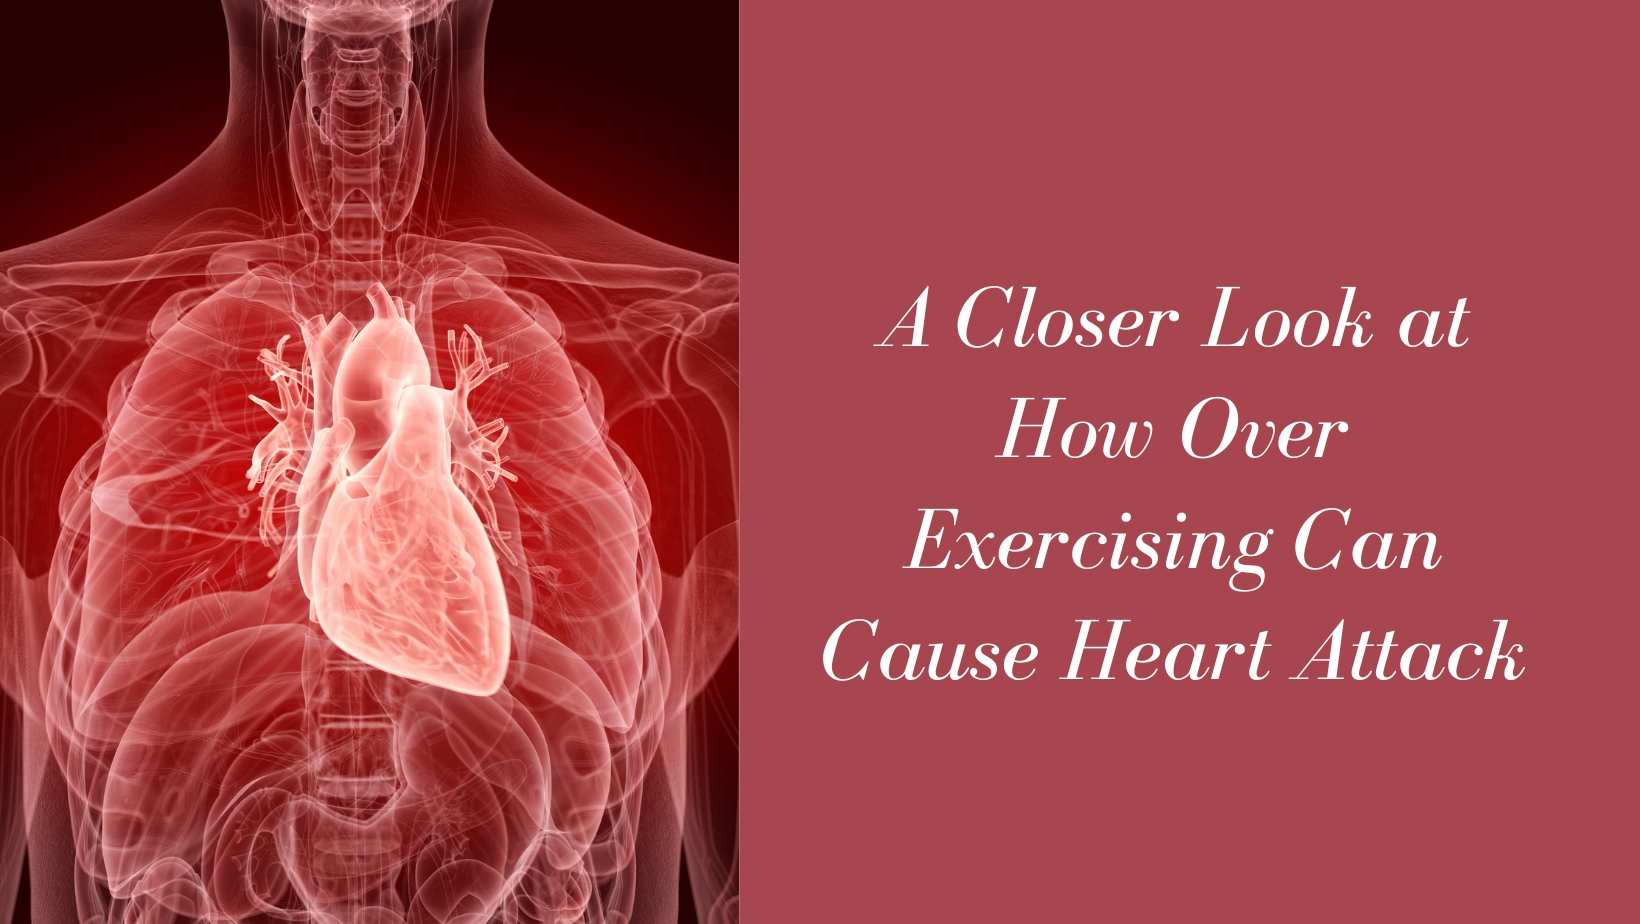 A Closer Look at How Over Exercising Can Cause Heart Attack